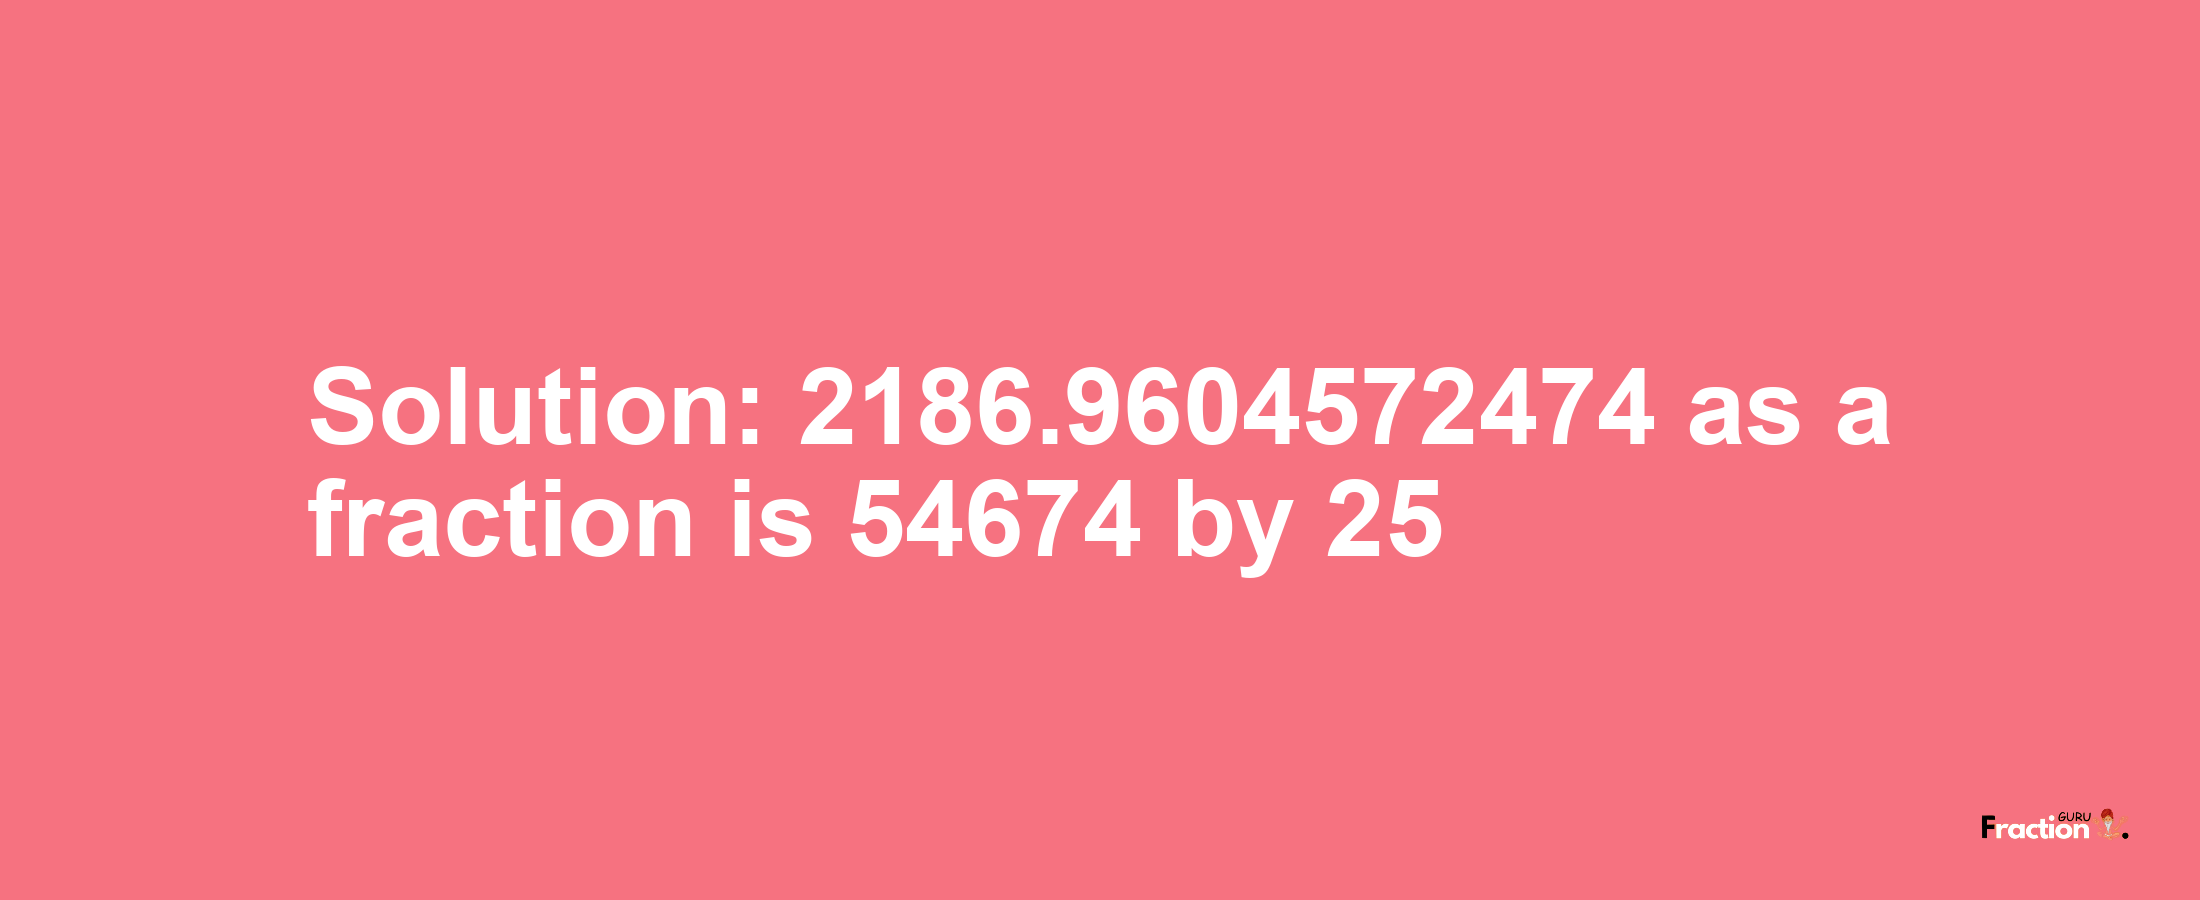 Solution:2186.9604572474 as a fraction is 54674/25